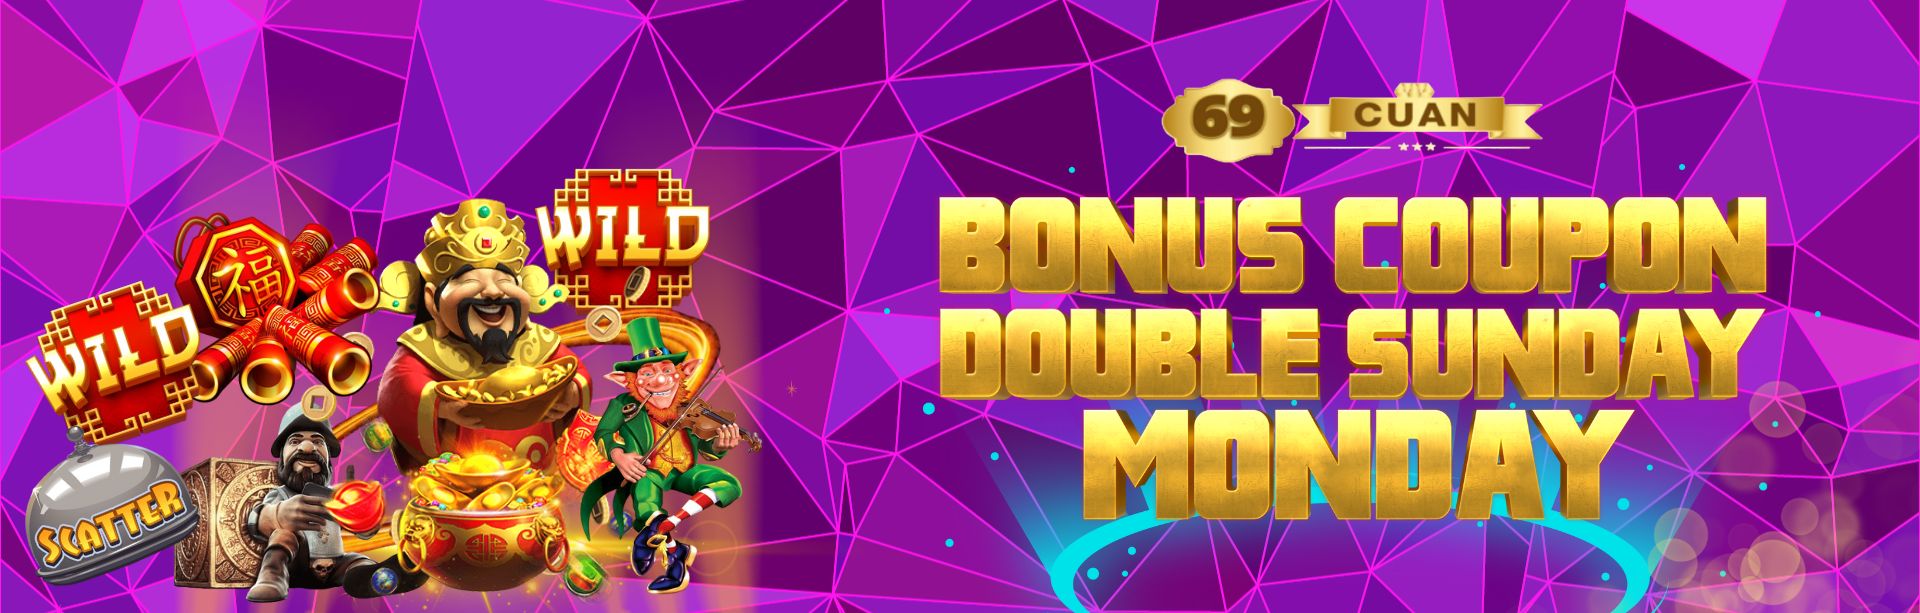 EVENT DOUBLE COUPON SUNDAY AND MONDAY